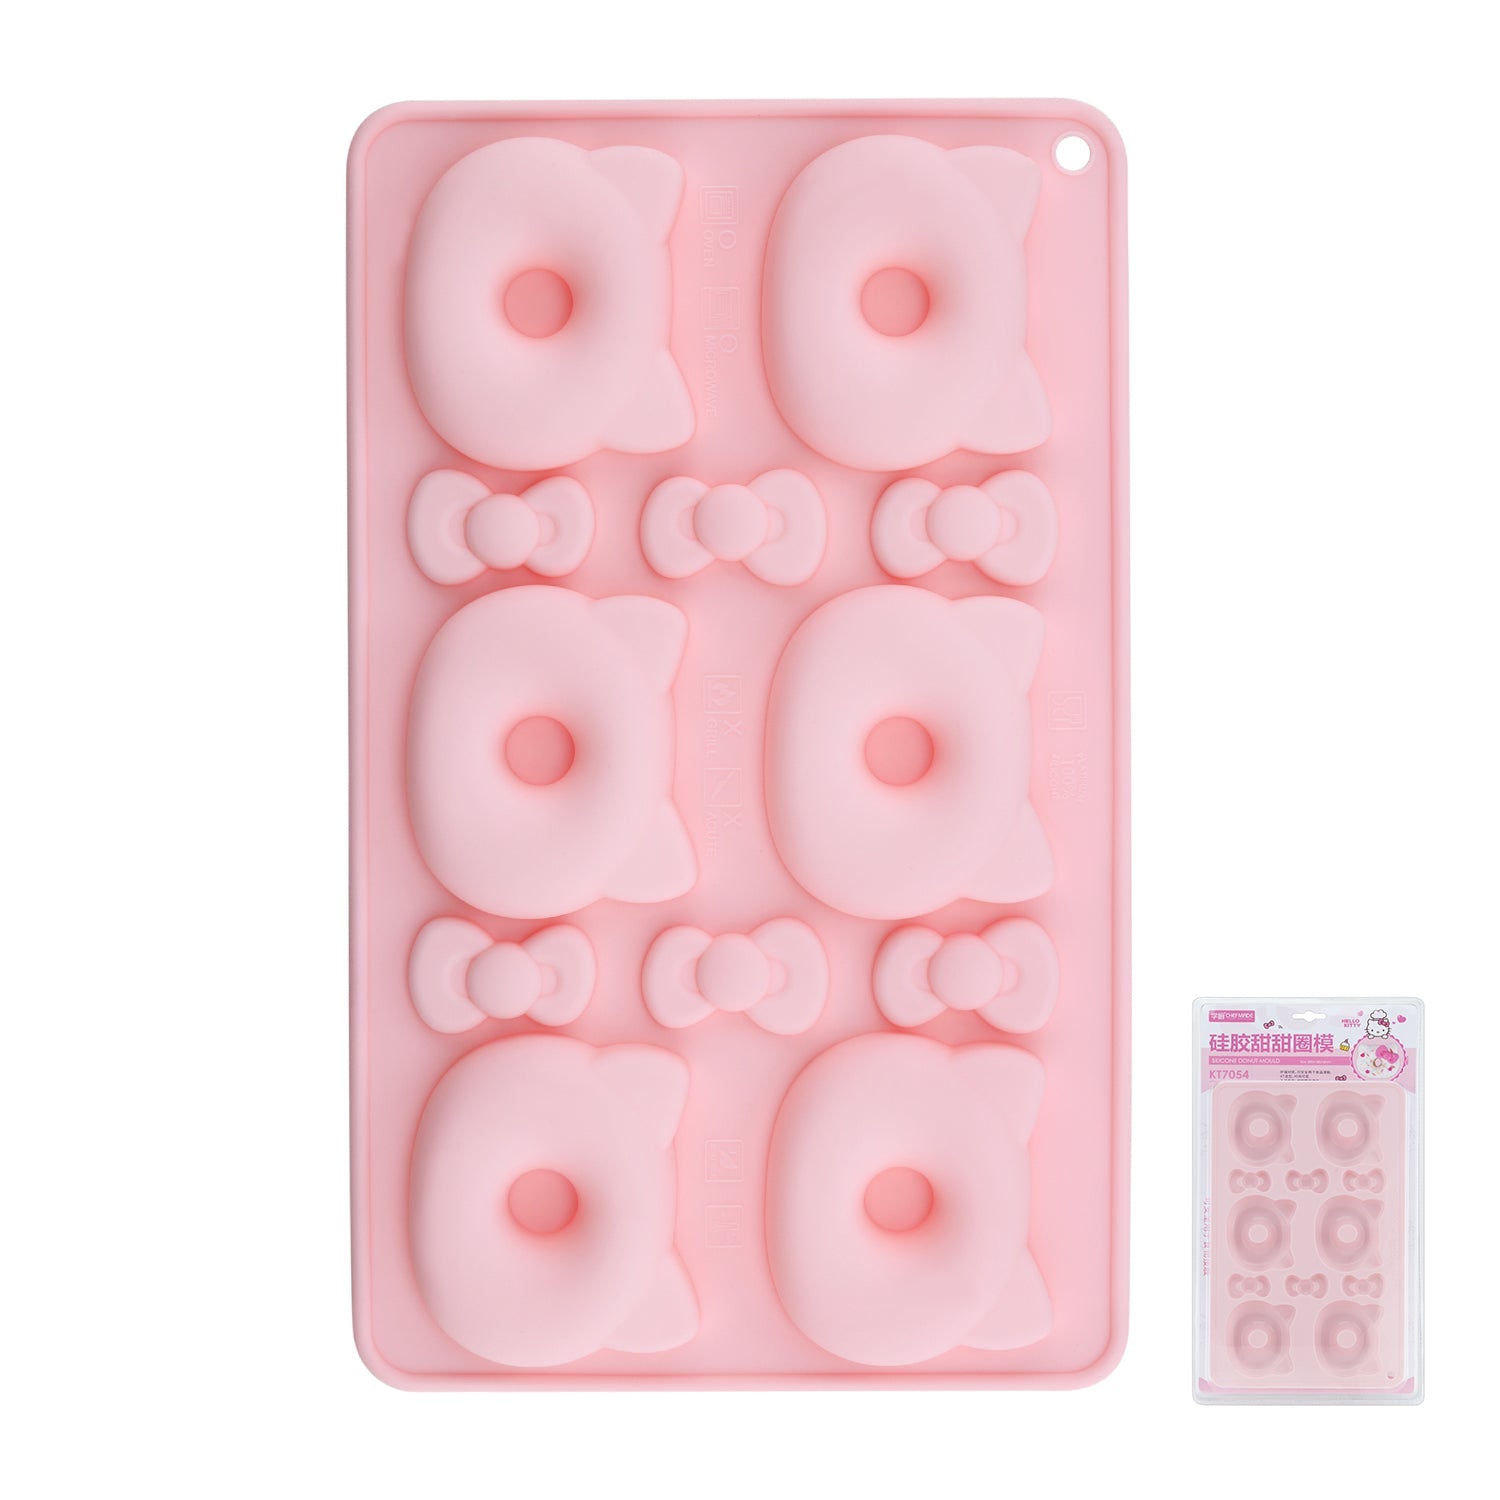 Chefmade學廚KT7054正版Hello kitty矽膠甜甜圈模Hello Kitty Silicone Donut Pan 6-Well